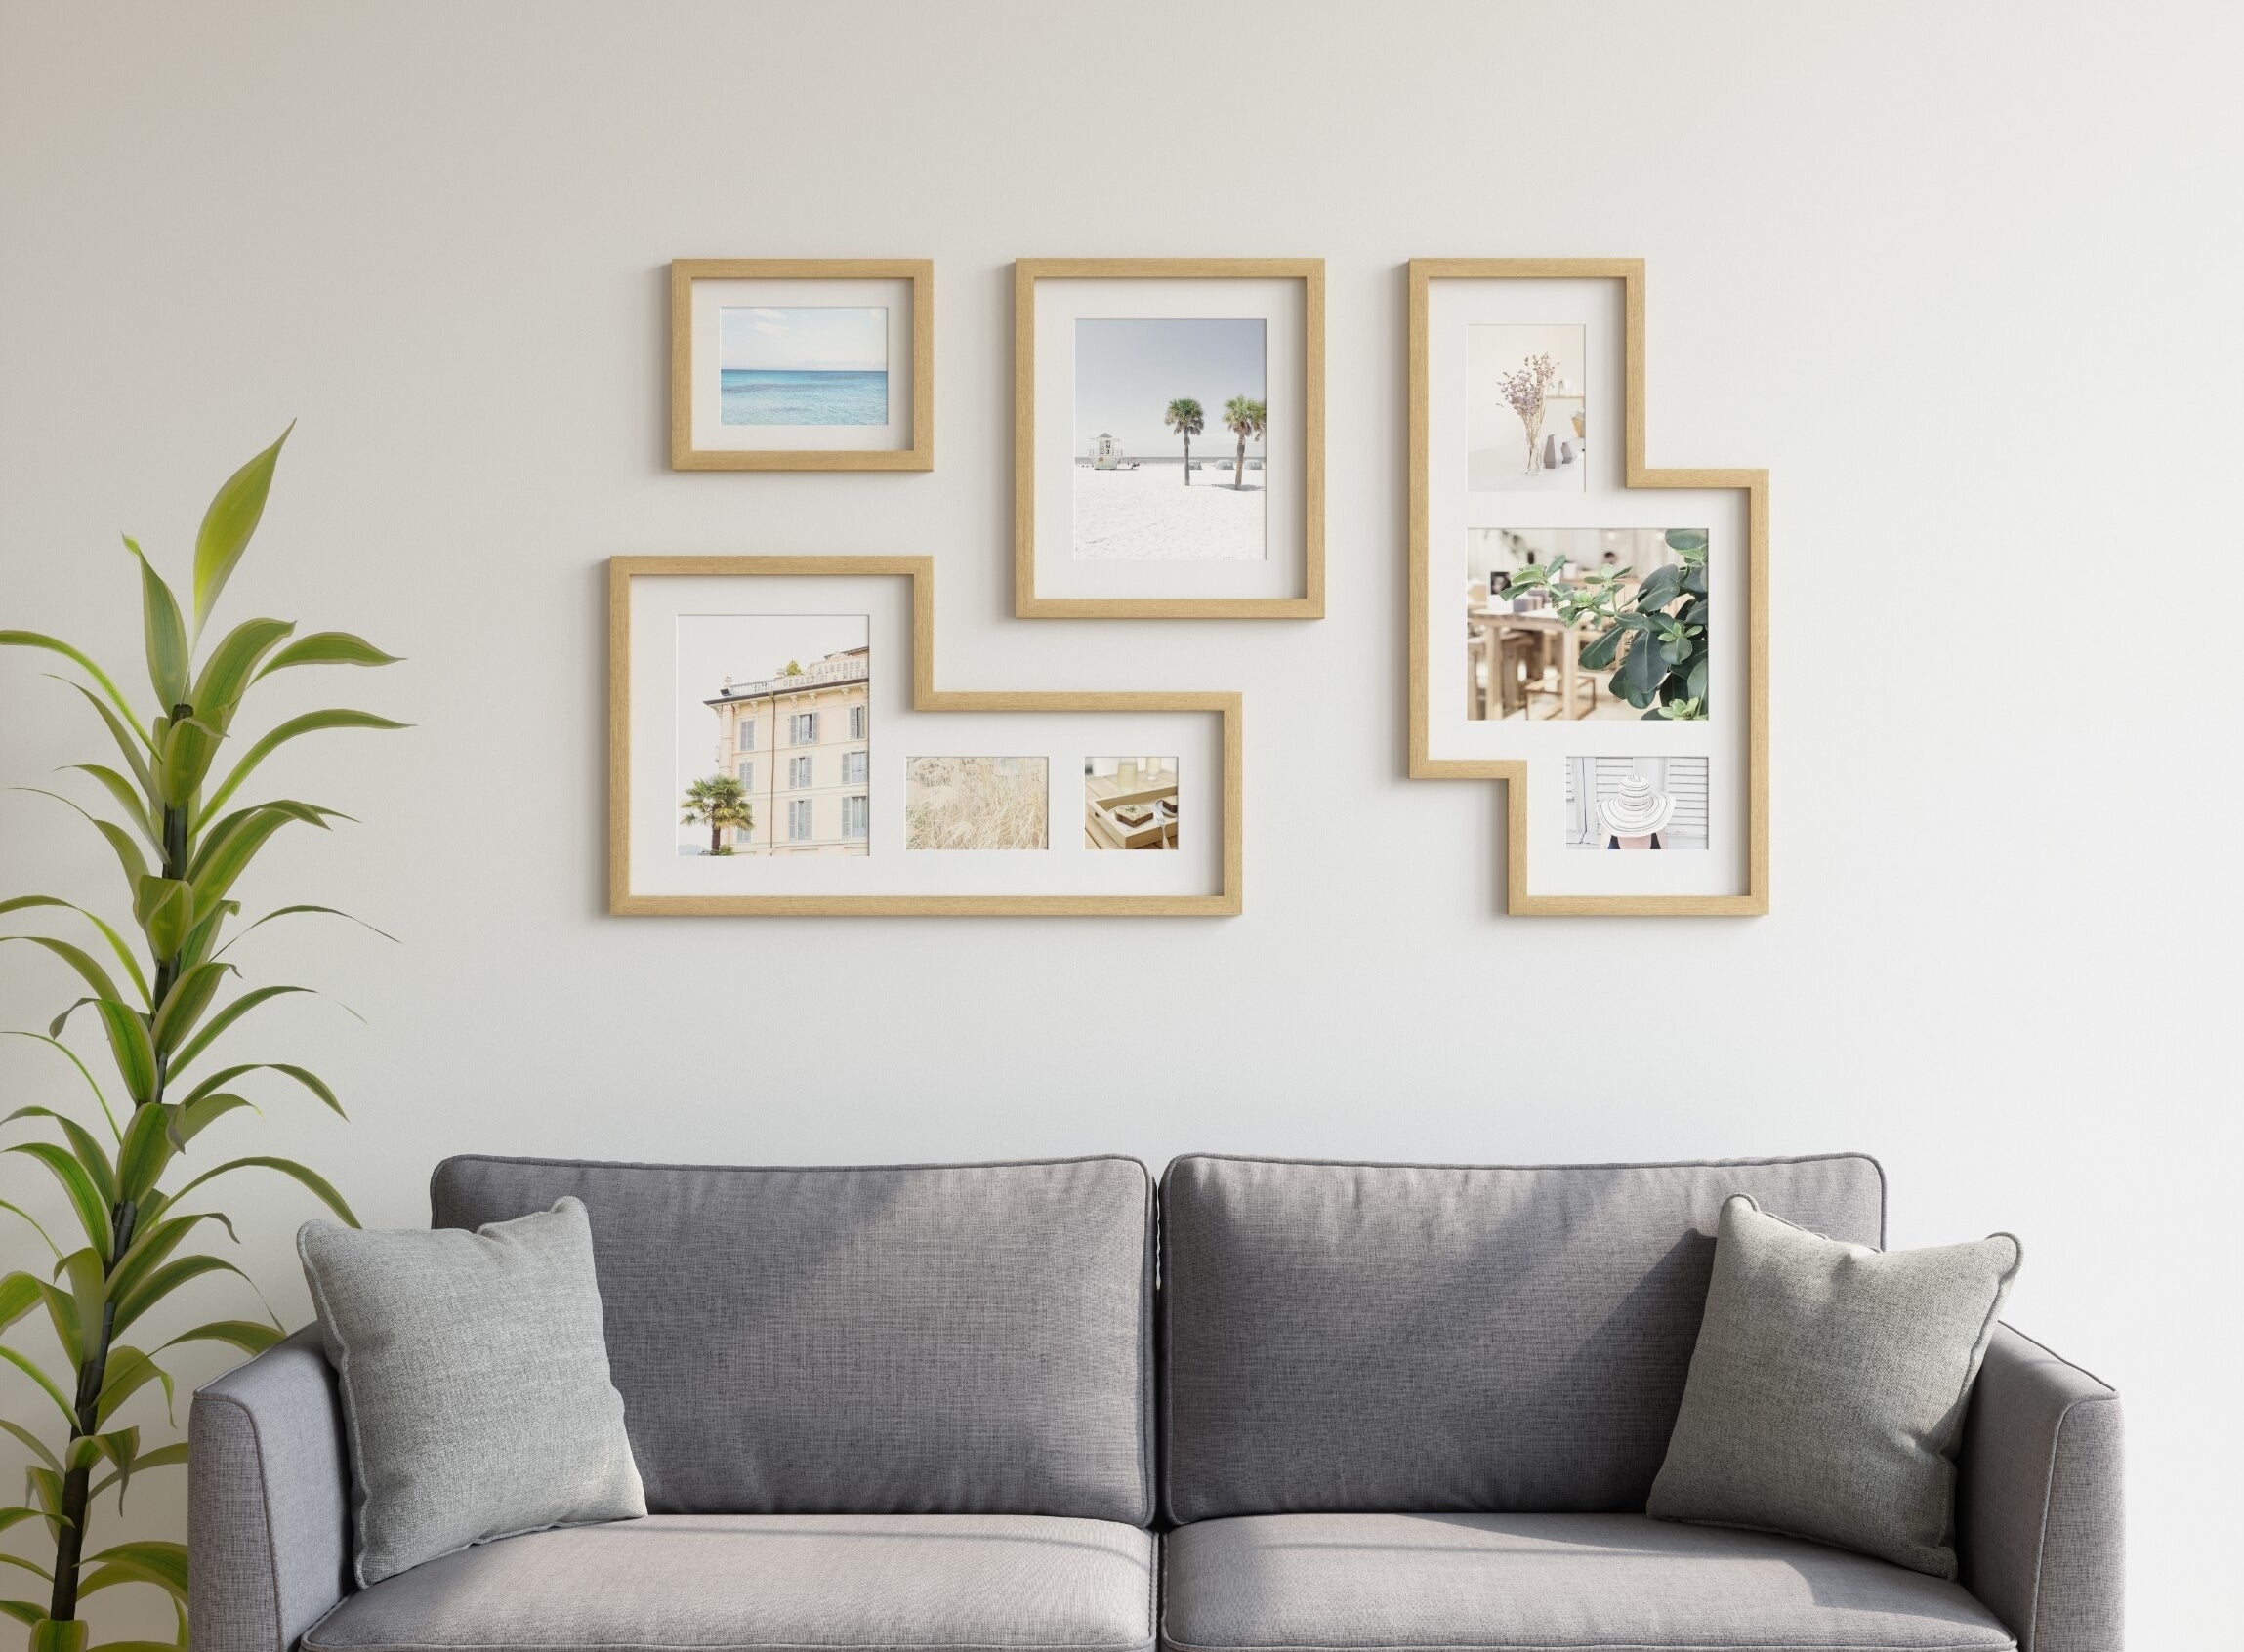 A set of irregularly-shaped gallery wall picture frames hung above a sofa